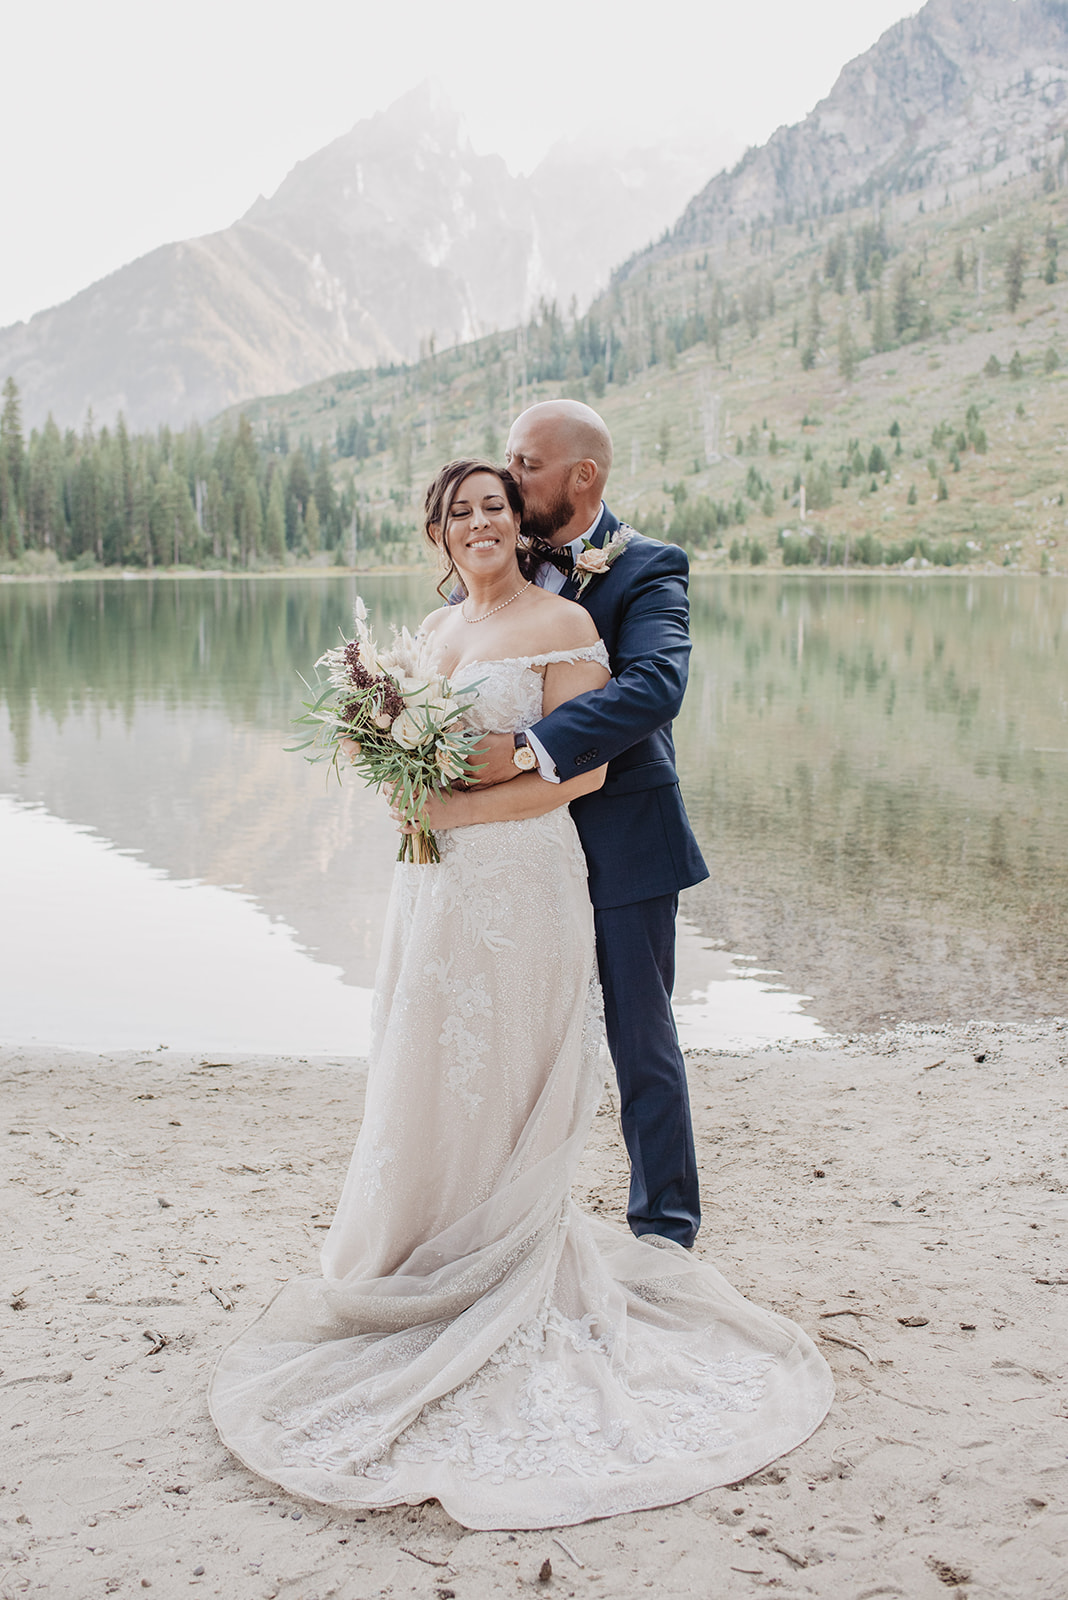 Oxbow Bend Elopement in the Tetons with bride and groom dressed up and standning next to String Lake as the groom holds onto the bride with the reflection of the mountain in the water